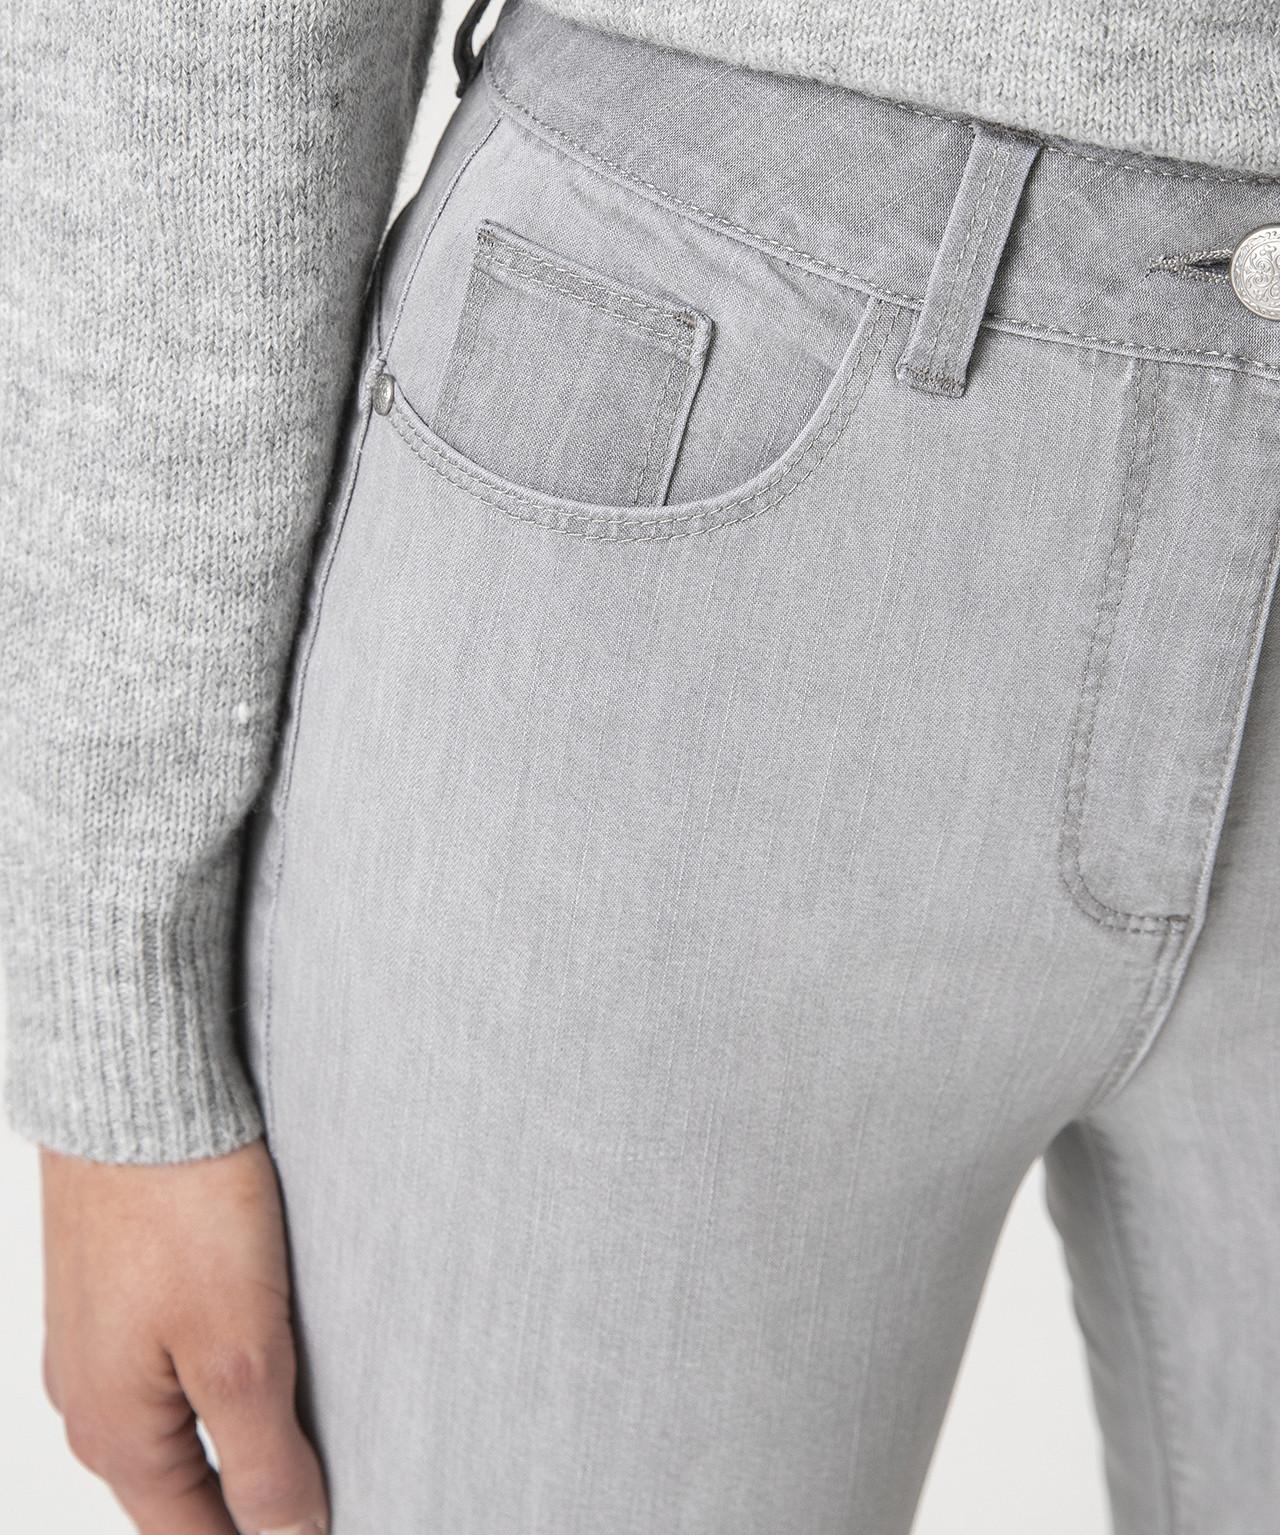 Damart  Jeans mit hoher Taille, Perfect Fit by , 2 Längen. 